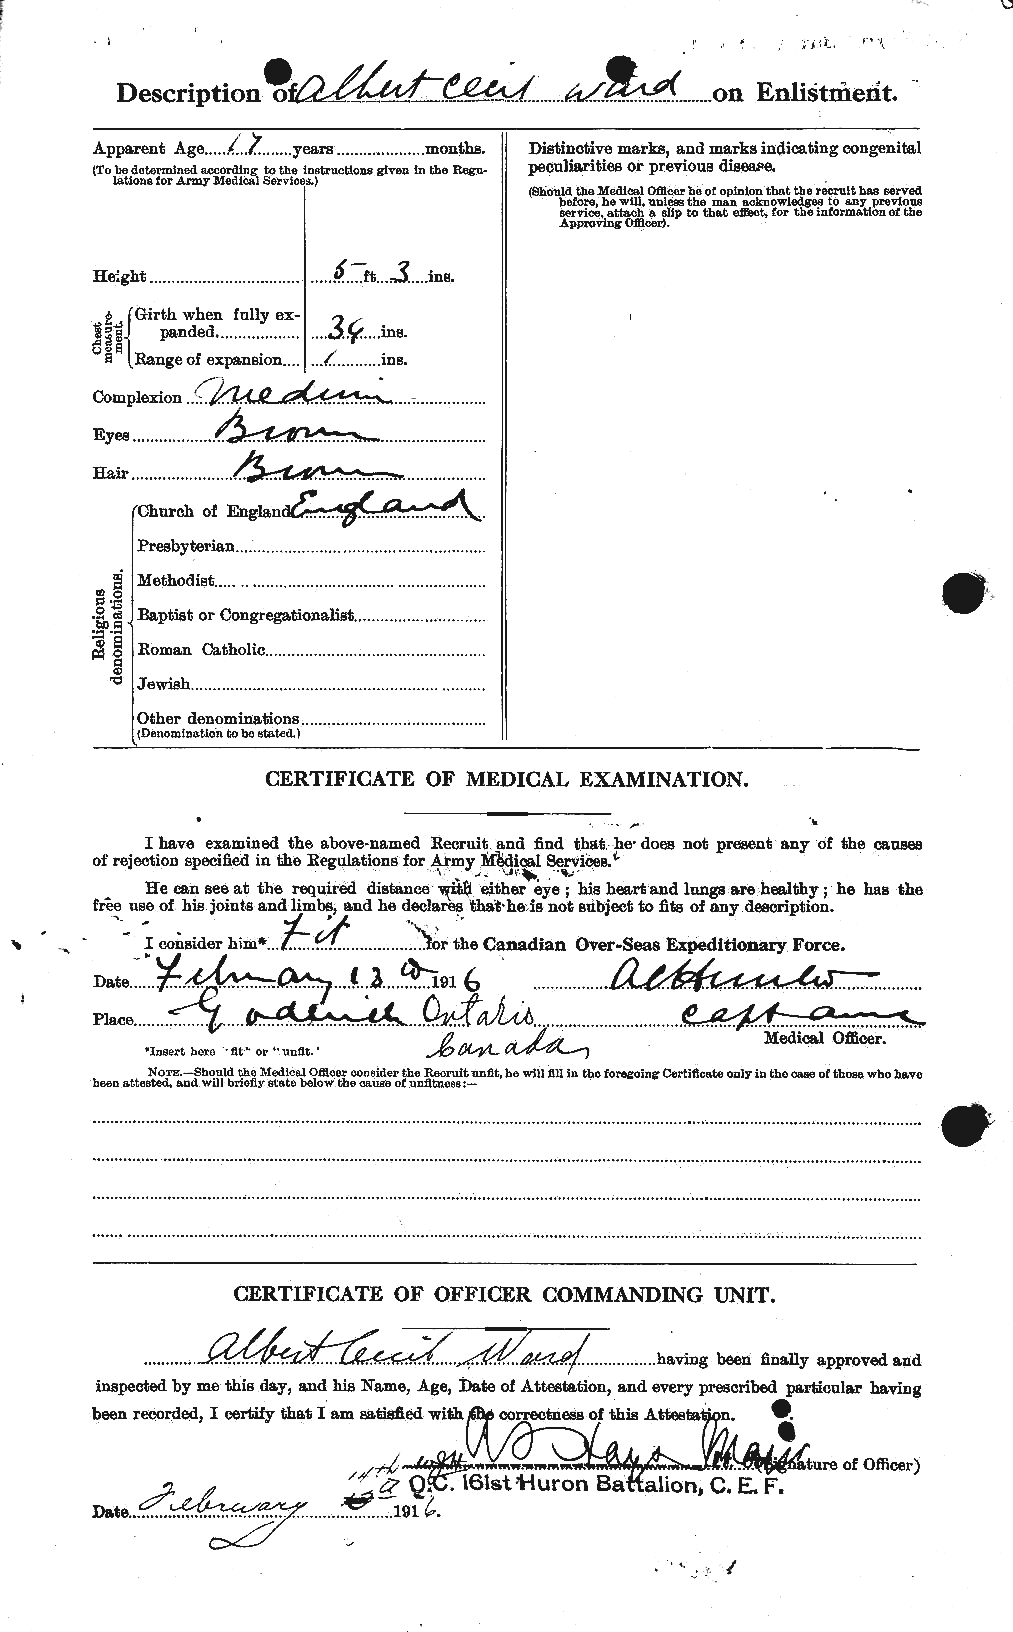 Personnel Records of the First World War - CEF 655090b